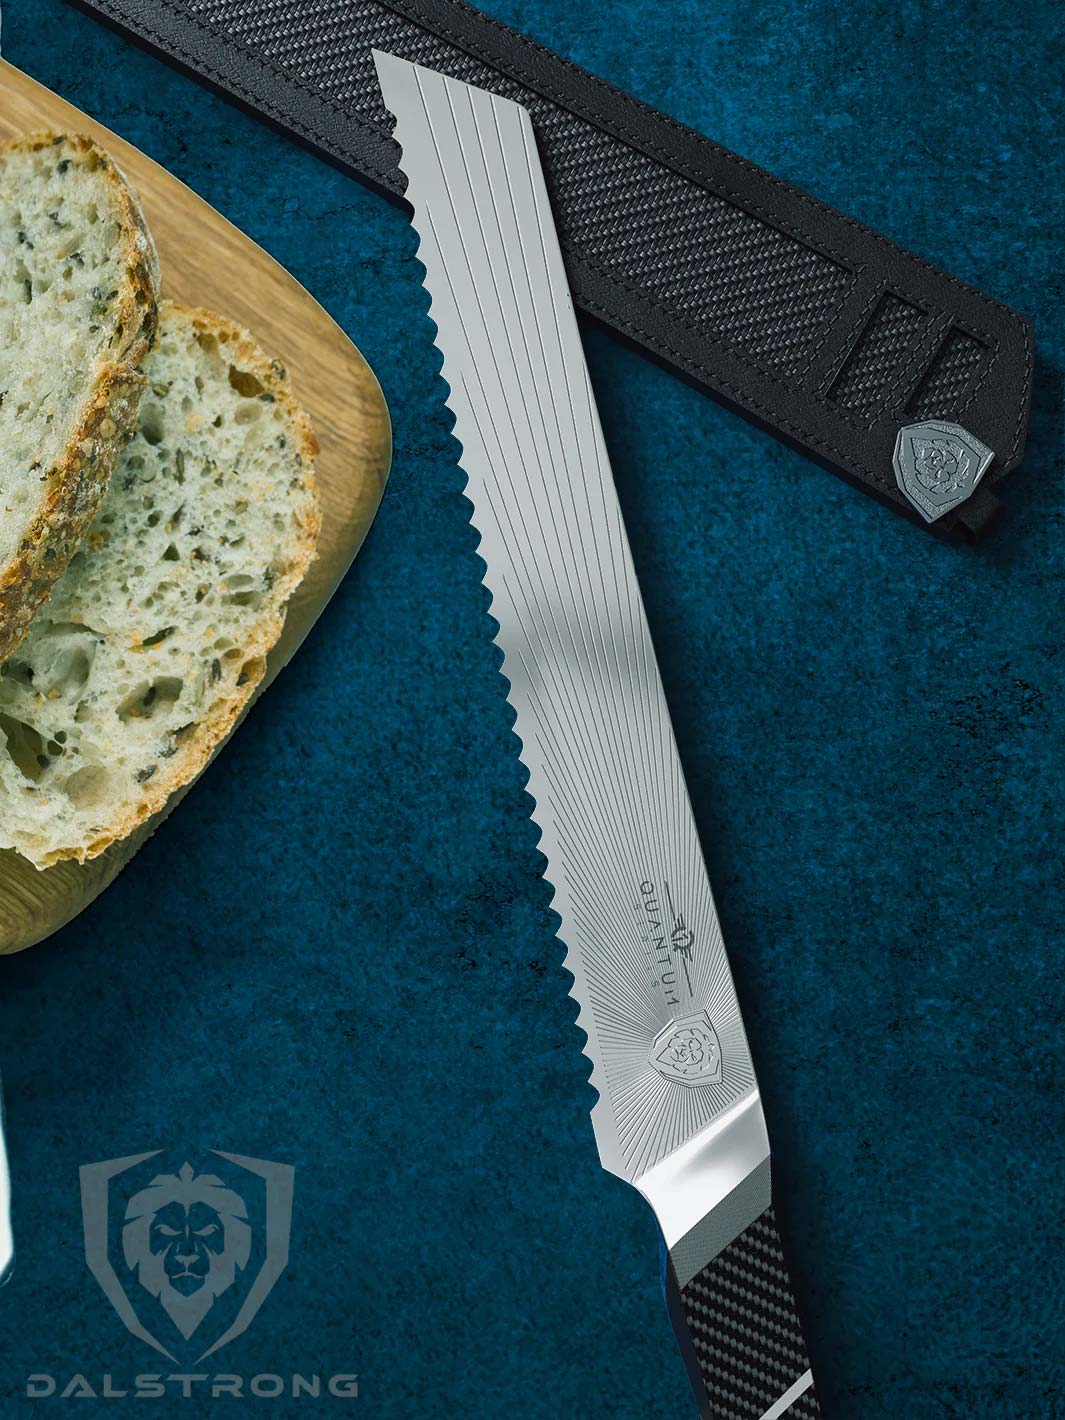 Dalstrong quantum 1 series 9 inch bread knife with slices of bread on a cutting board.